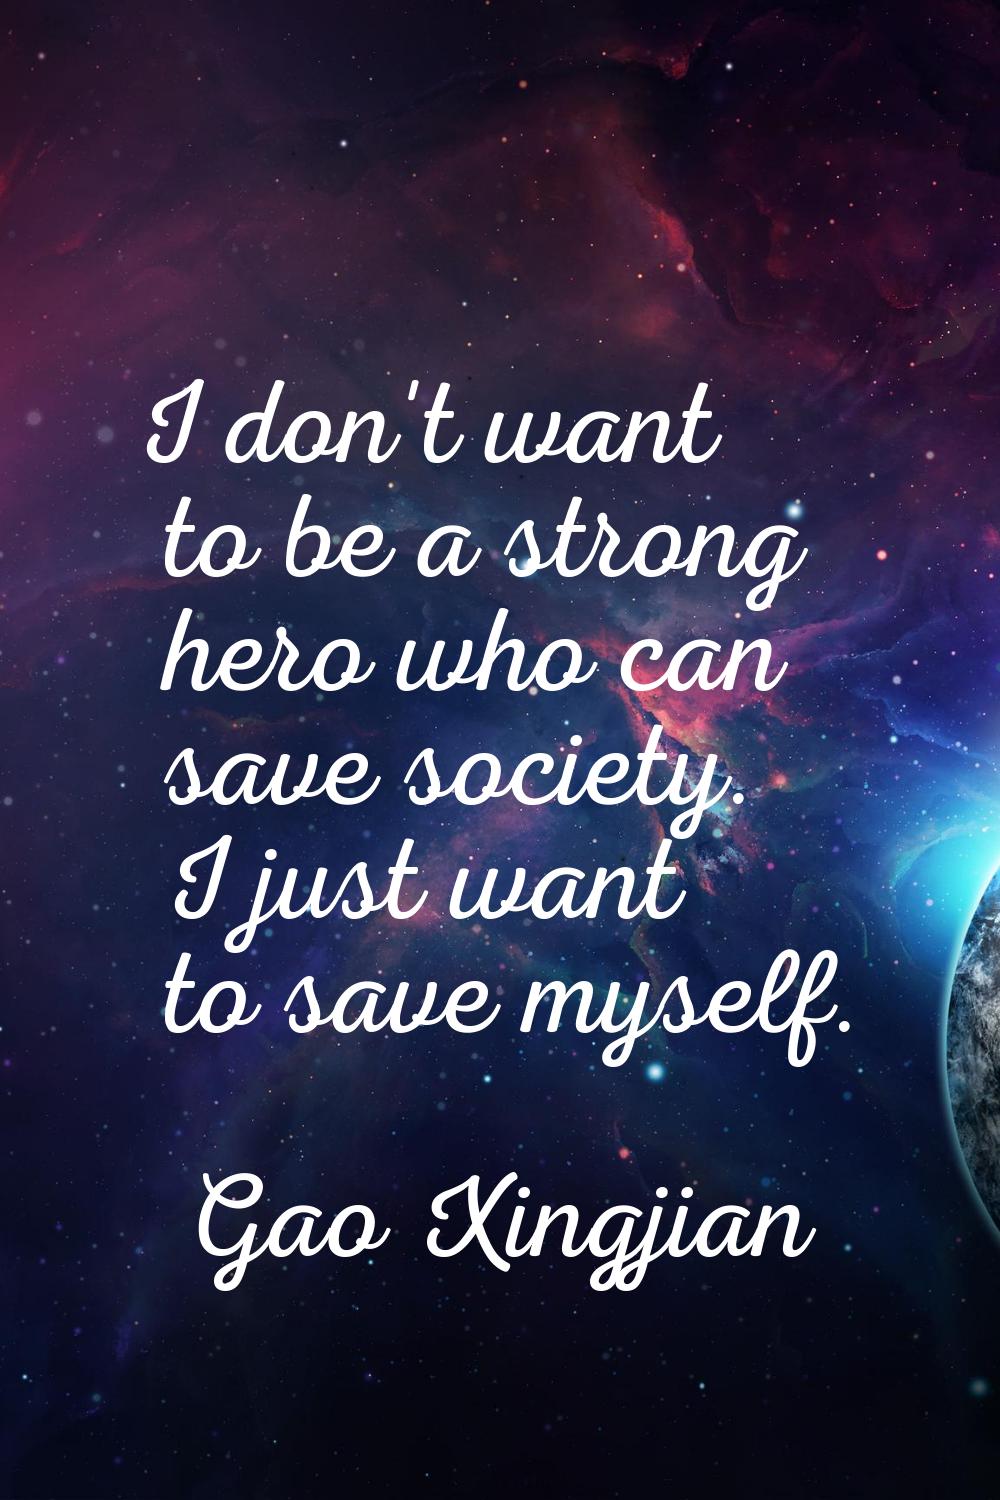 I don't want to be a strong hero who can save society. I just want to save myself.